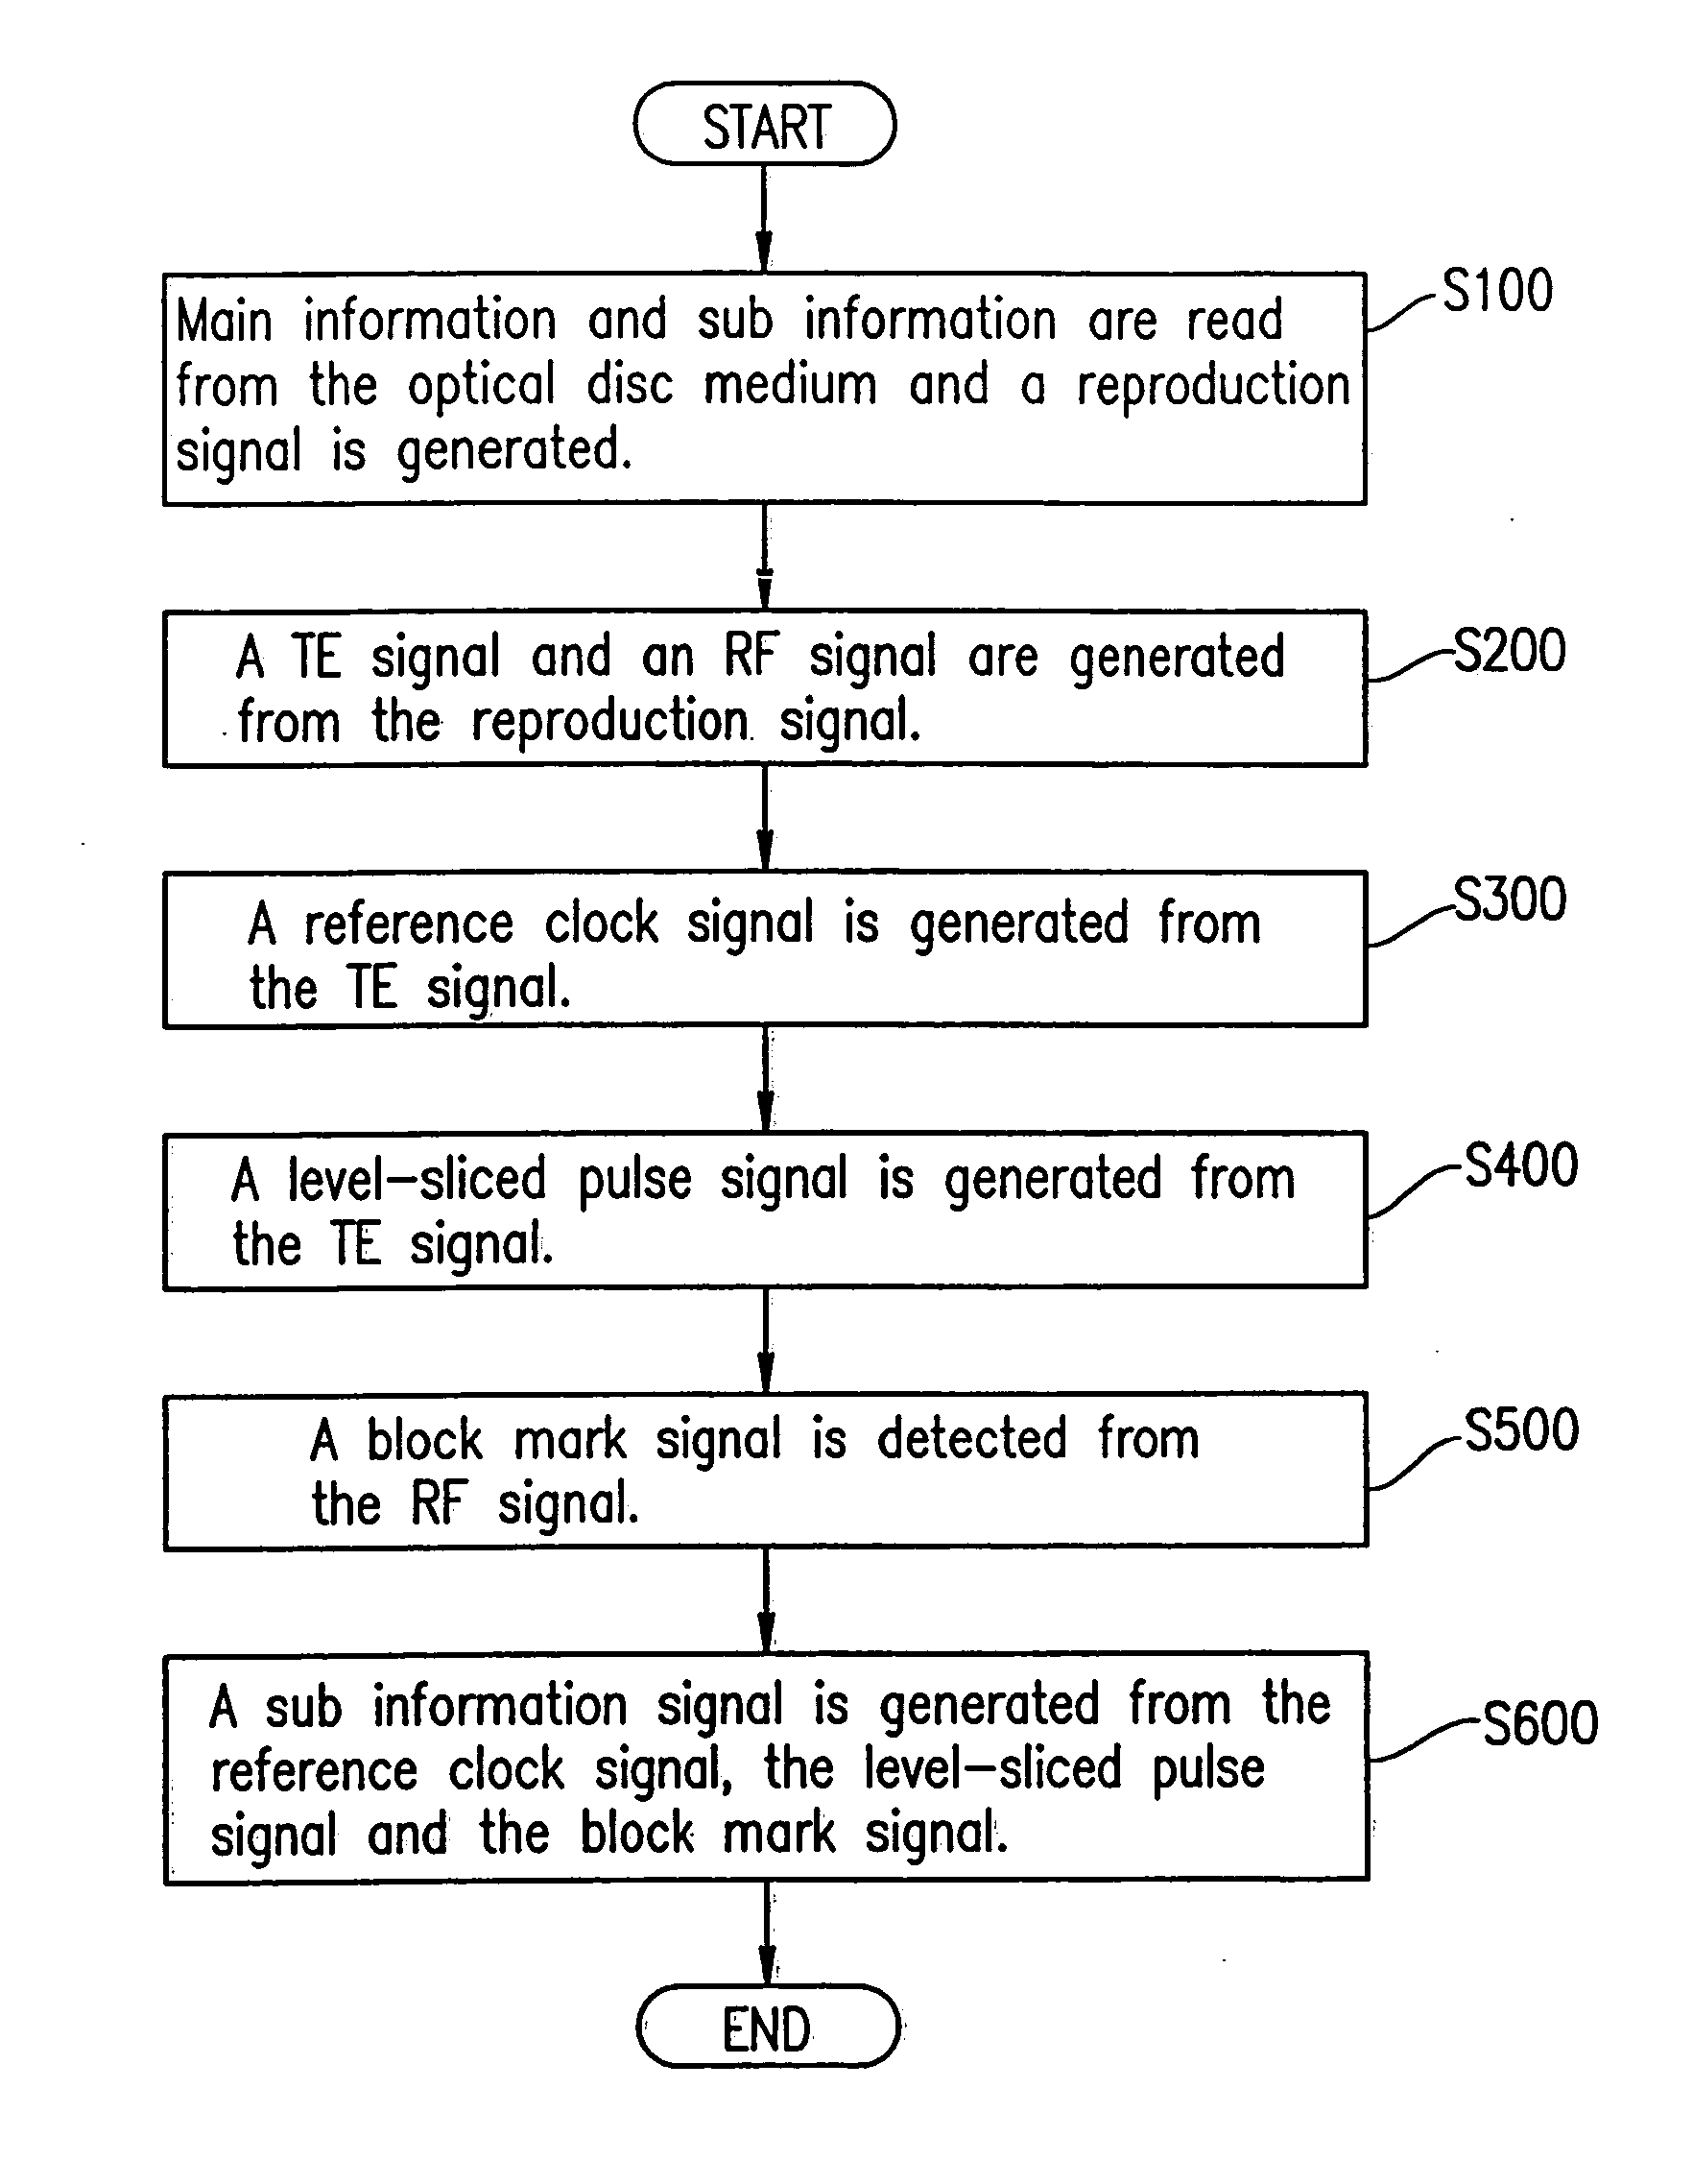 Optical disc and physical address format